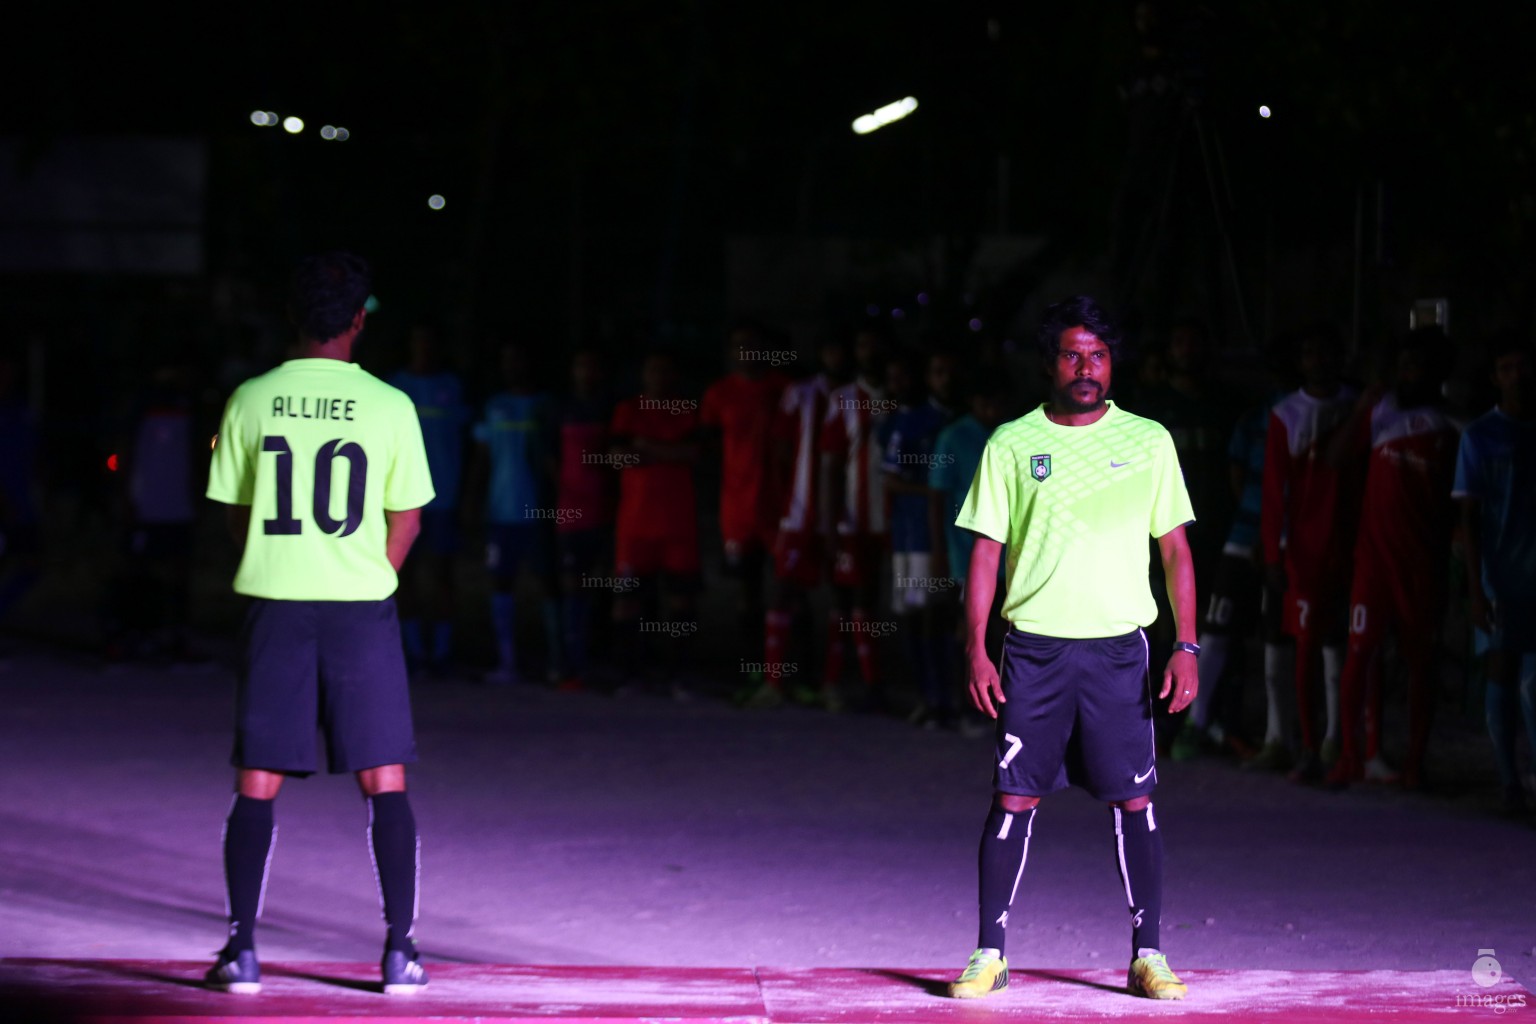 Milo Club Maldives Cup opening ceremony and opening matches in Male', Maldives, Thursday, March. 24, 2016. (Images.mv Photo/ Hussain Sinan).